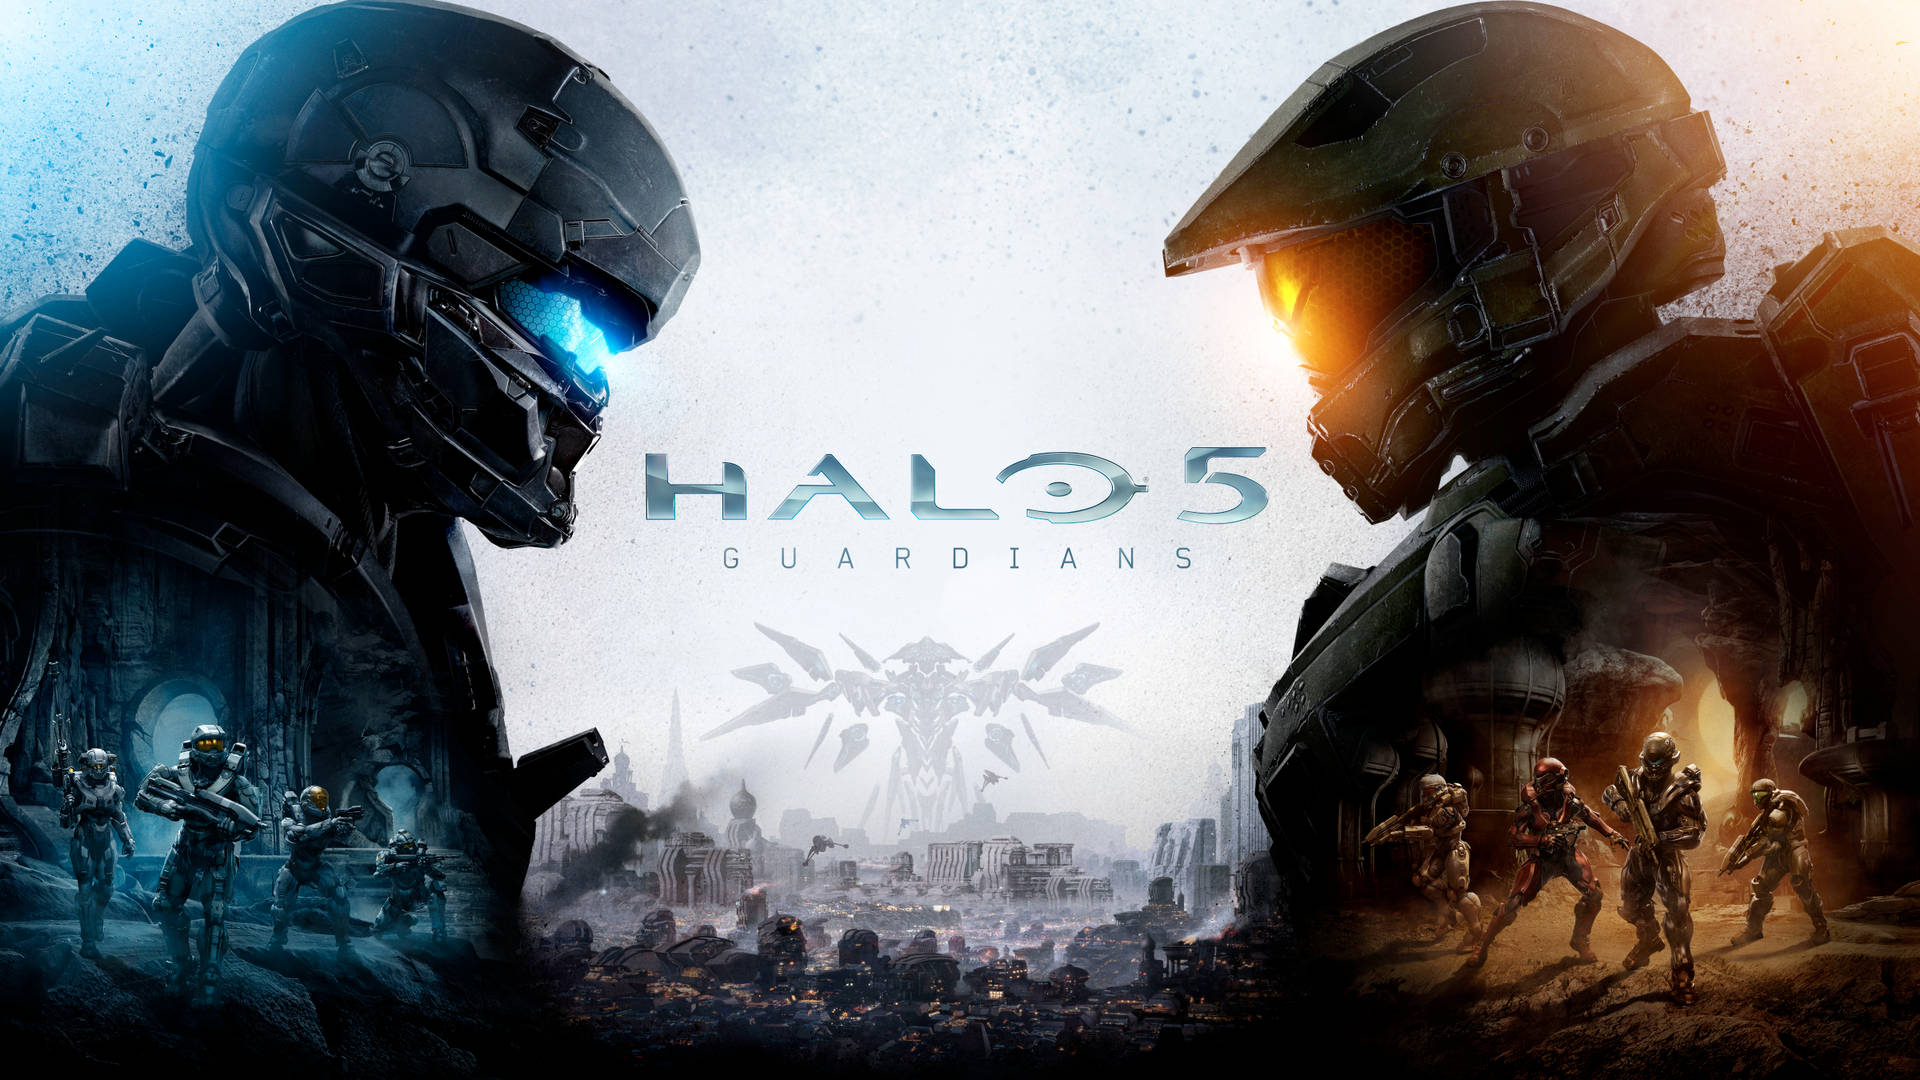 Exciting Battle Scene From Halo 5 In Stunning 4k Resolution Background